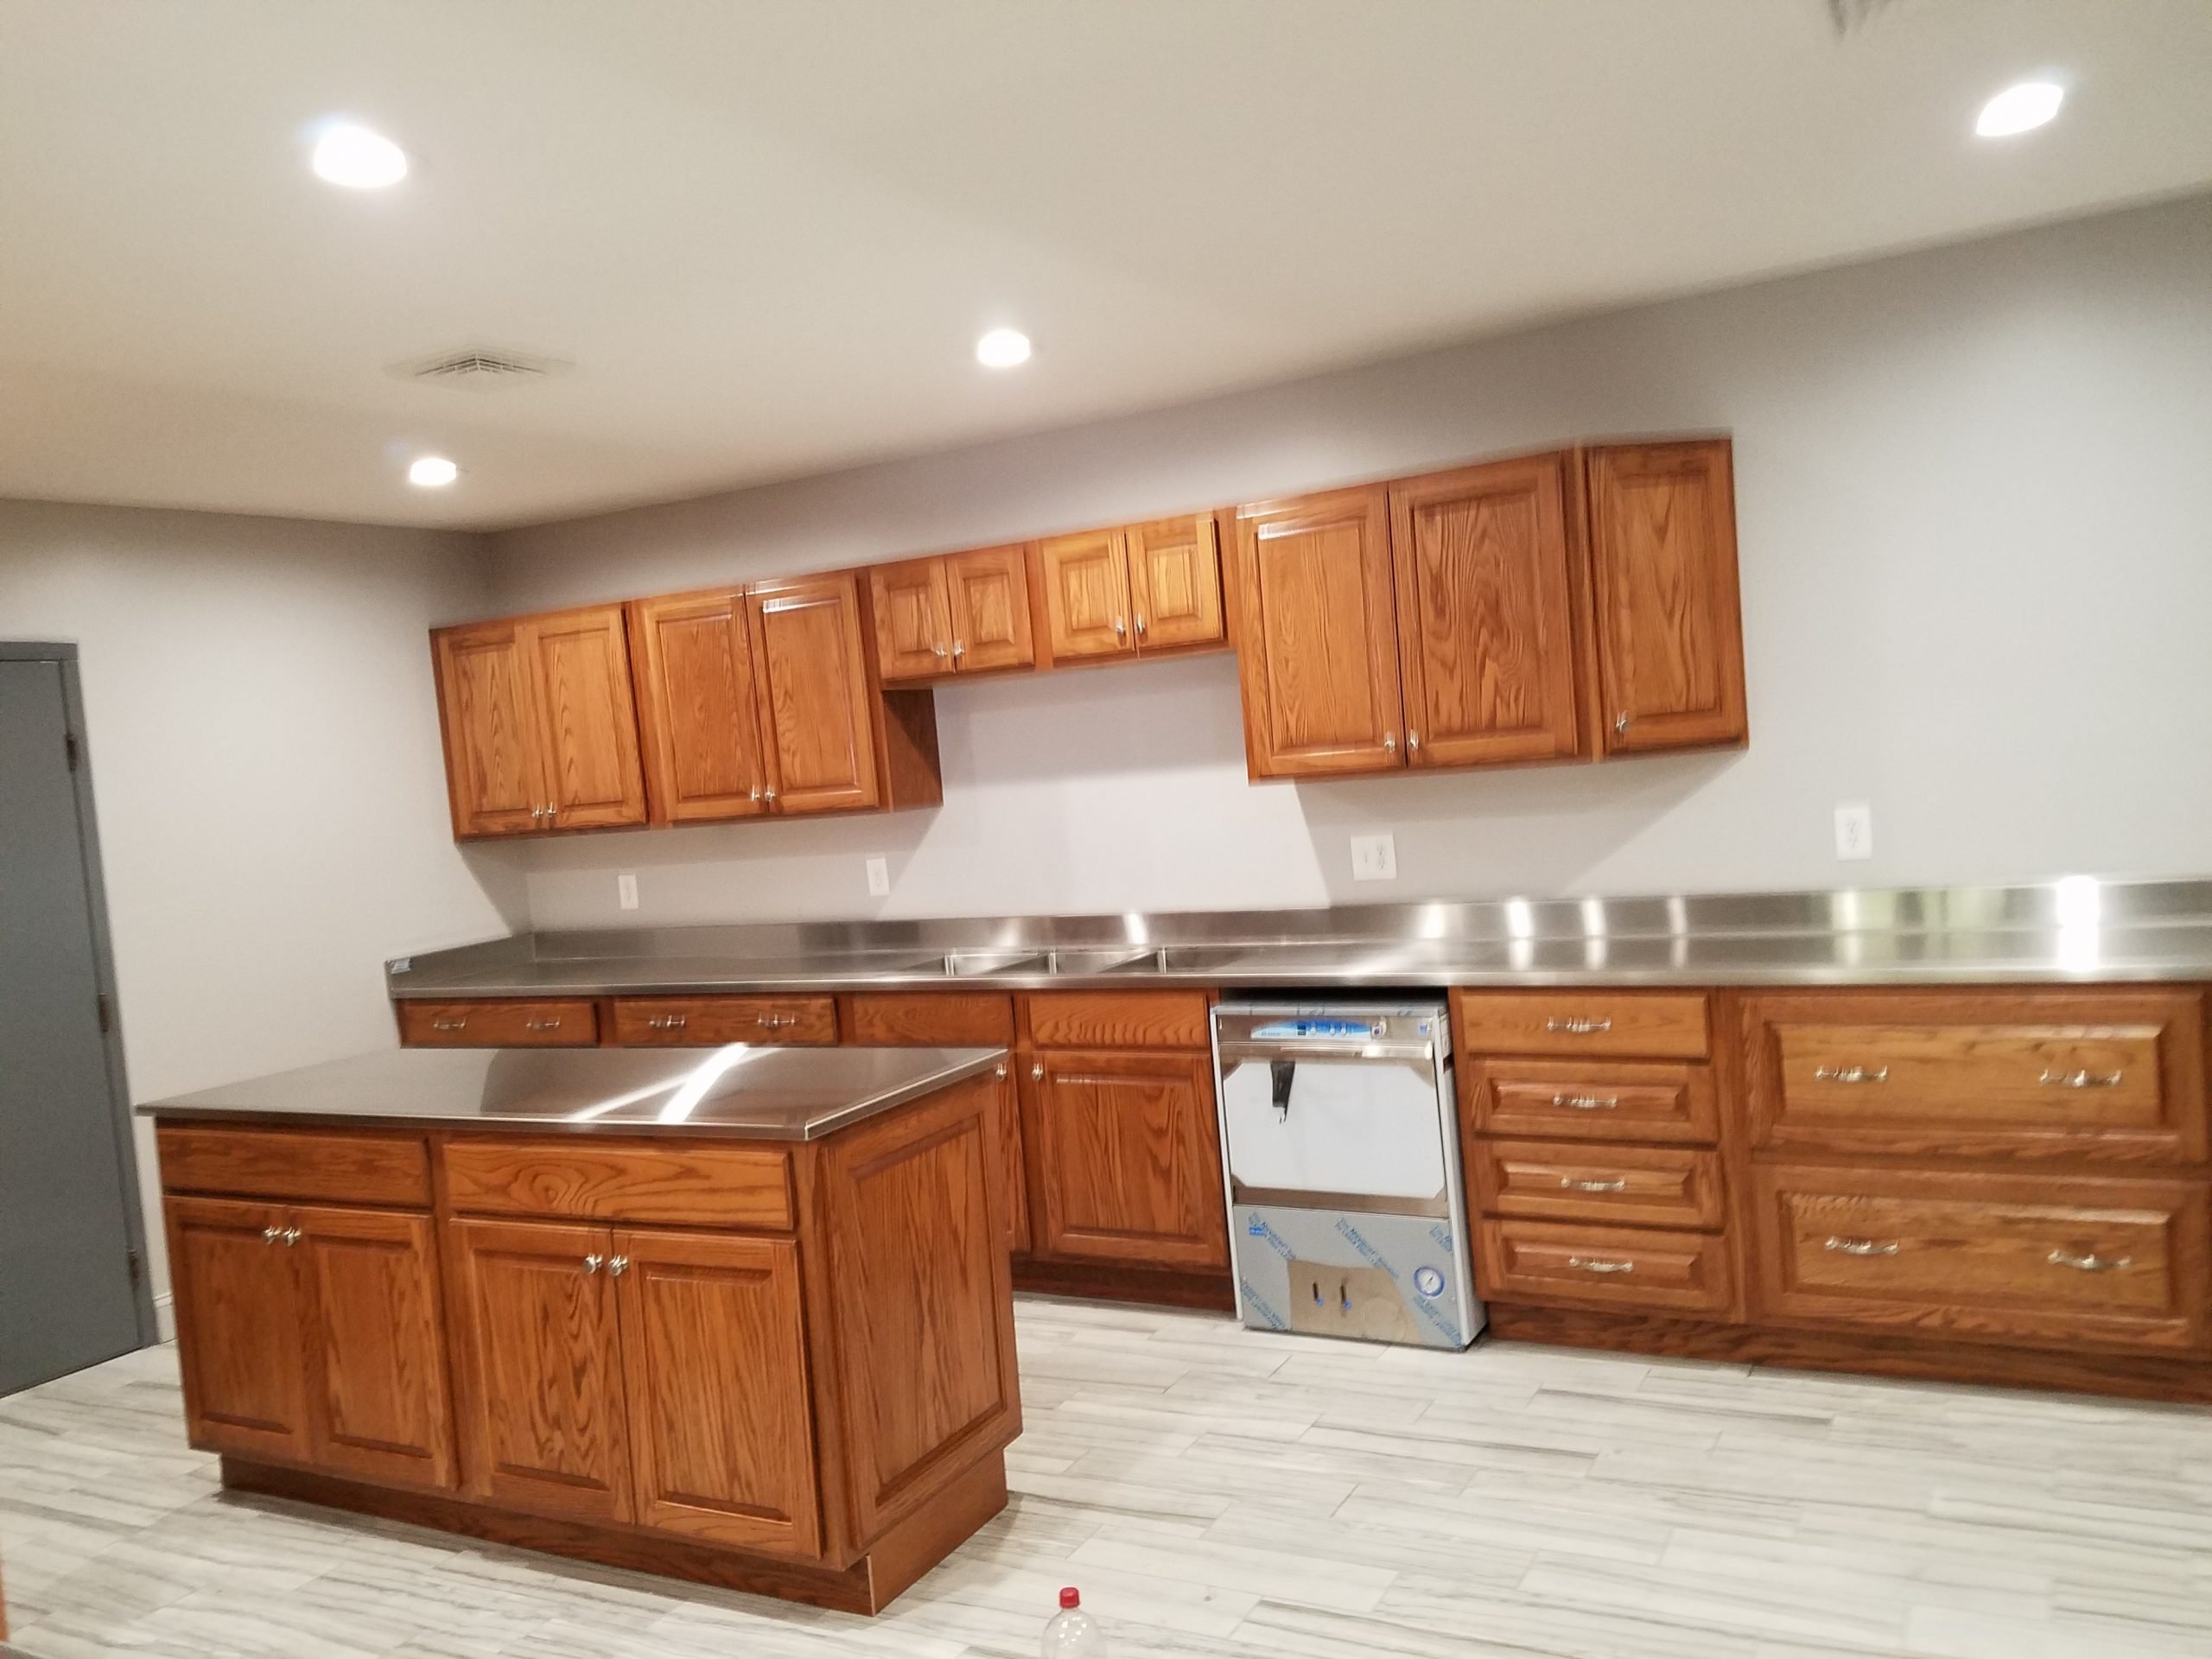 Custom Stainless Steel Top on Wood Cabinets